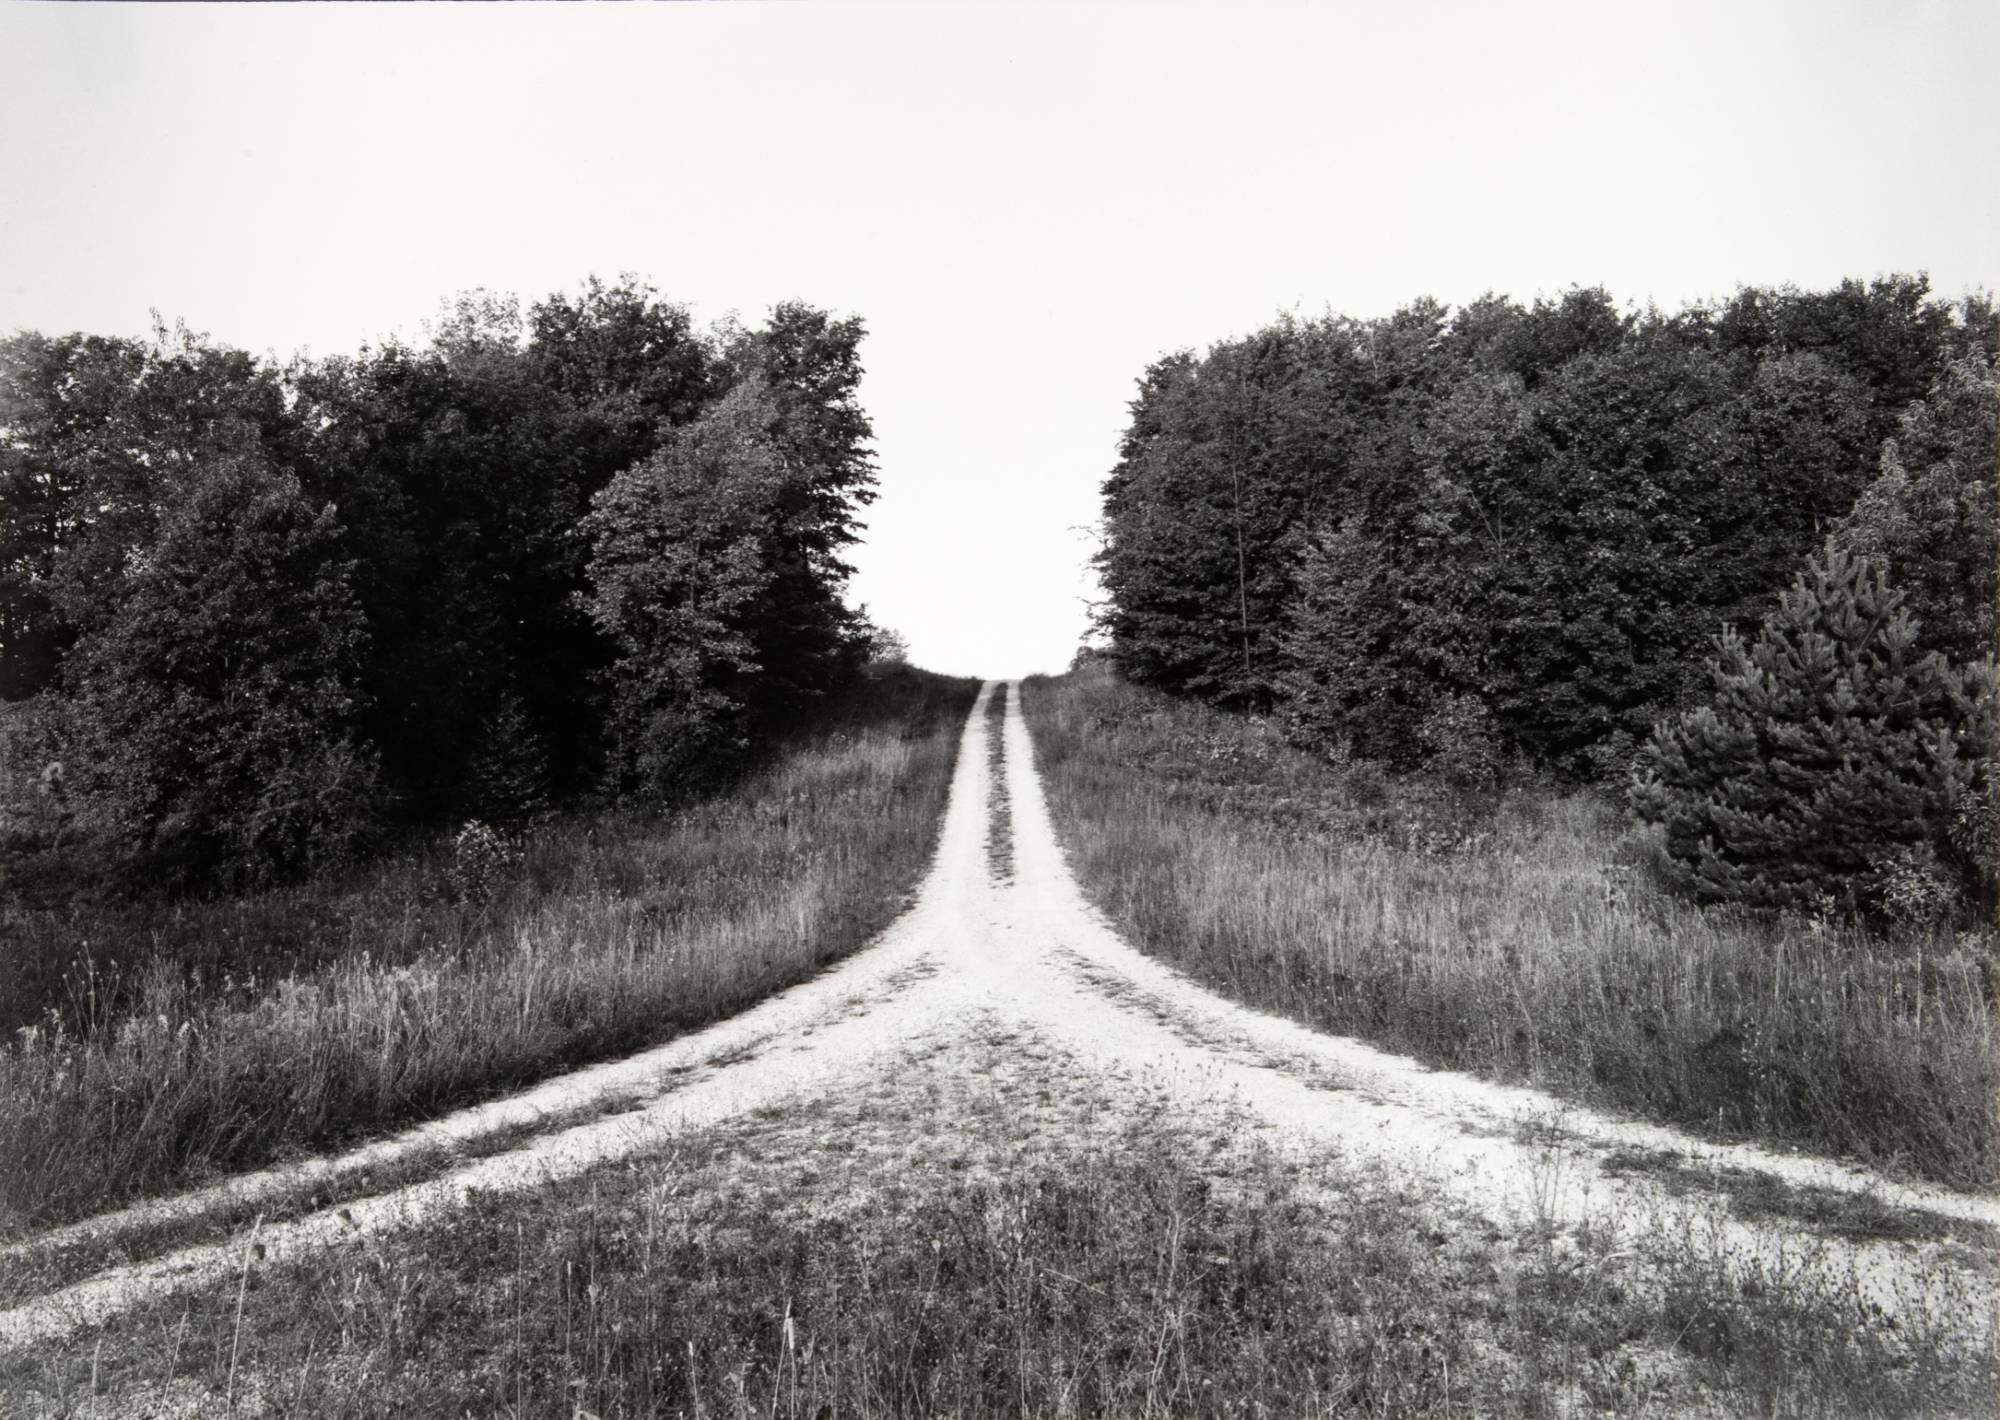 two-track dirt road leading to a line of trees on the horizon